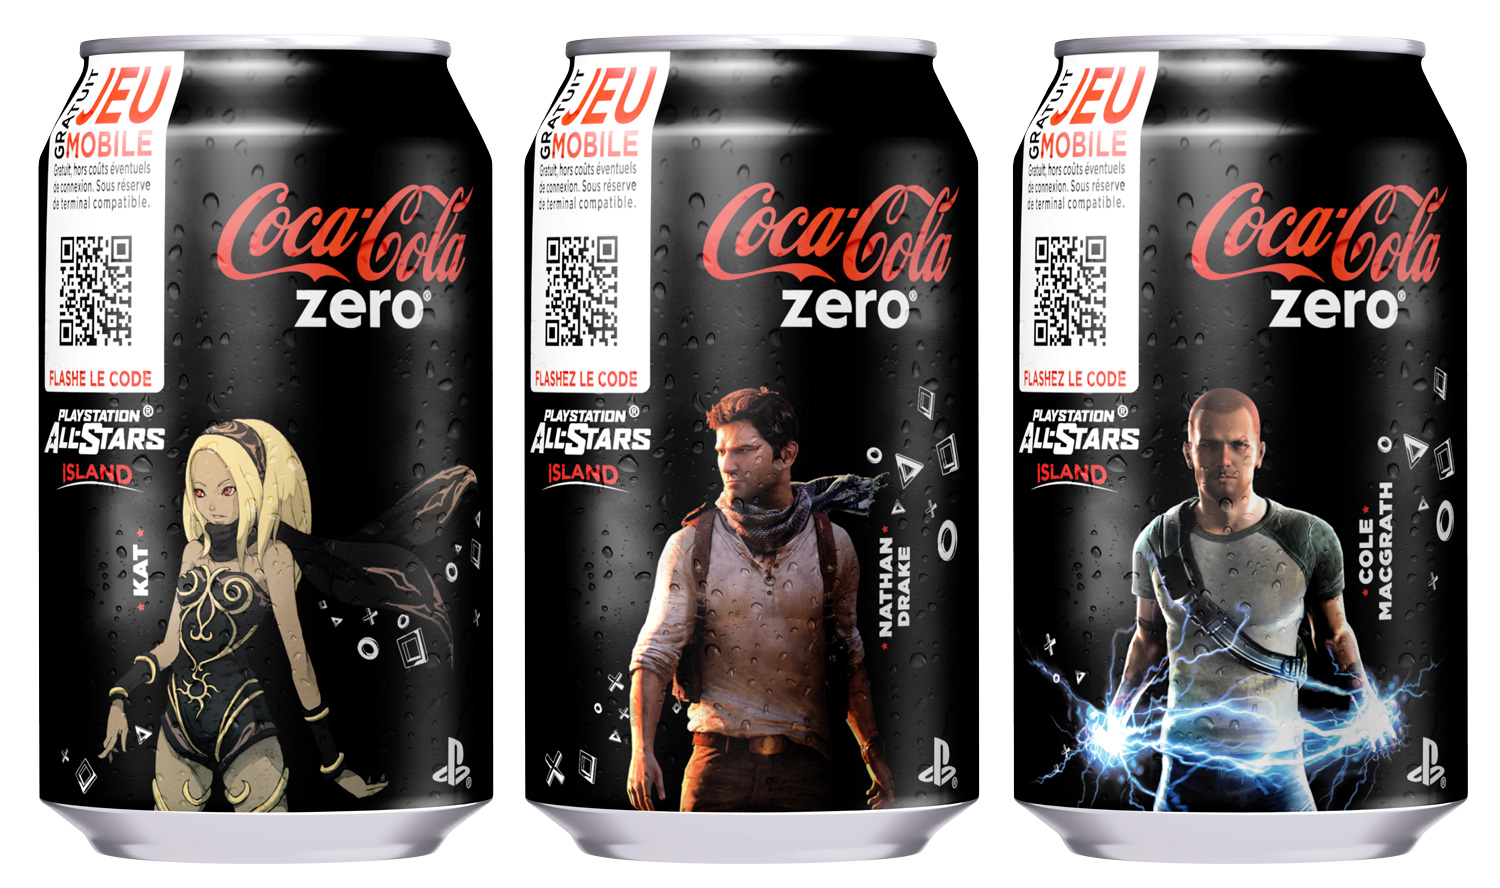 [ANNONCE] Playstation All-Stars Coca